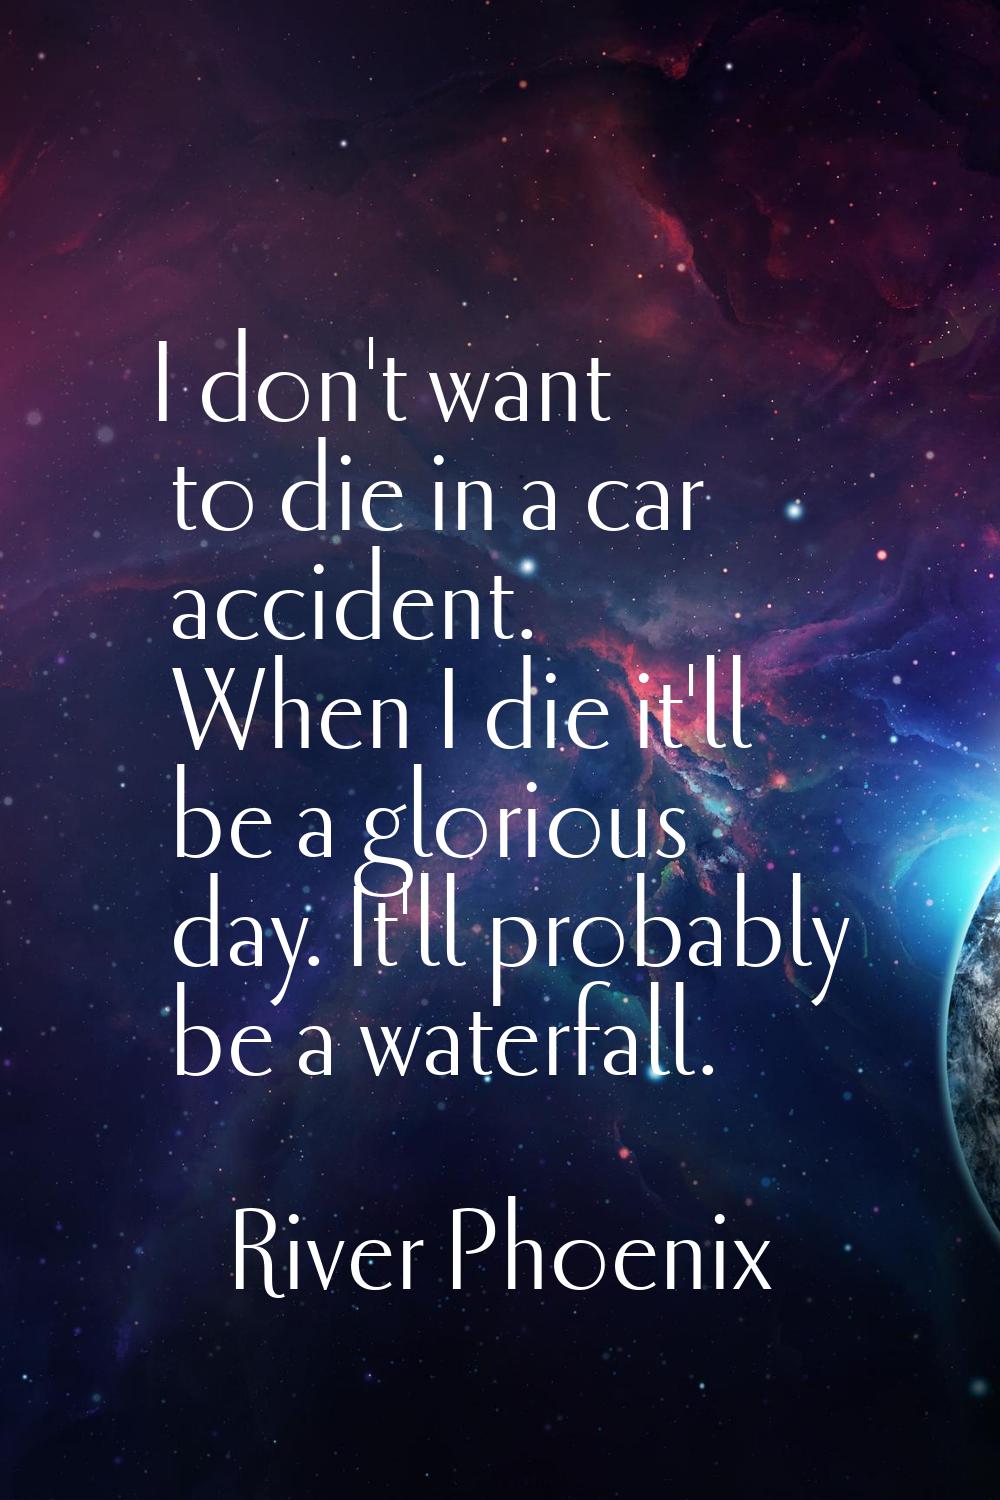 I don't want to die in a car accident. When I die it'll be a glorious day. It'll probably be a wate